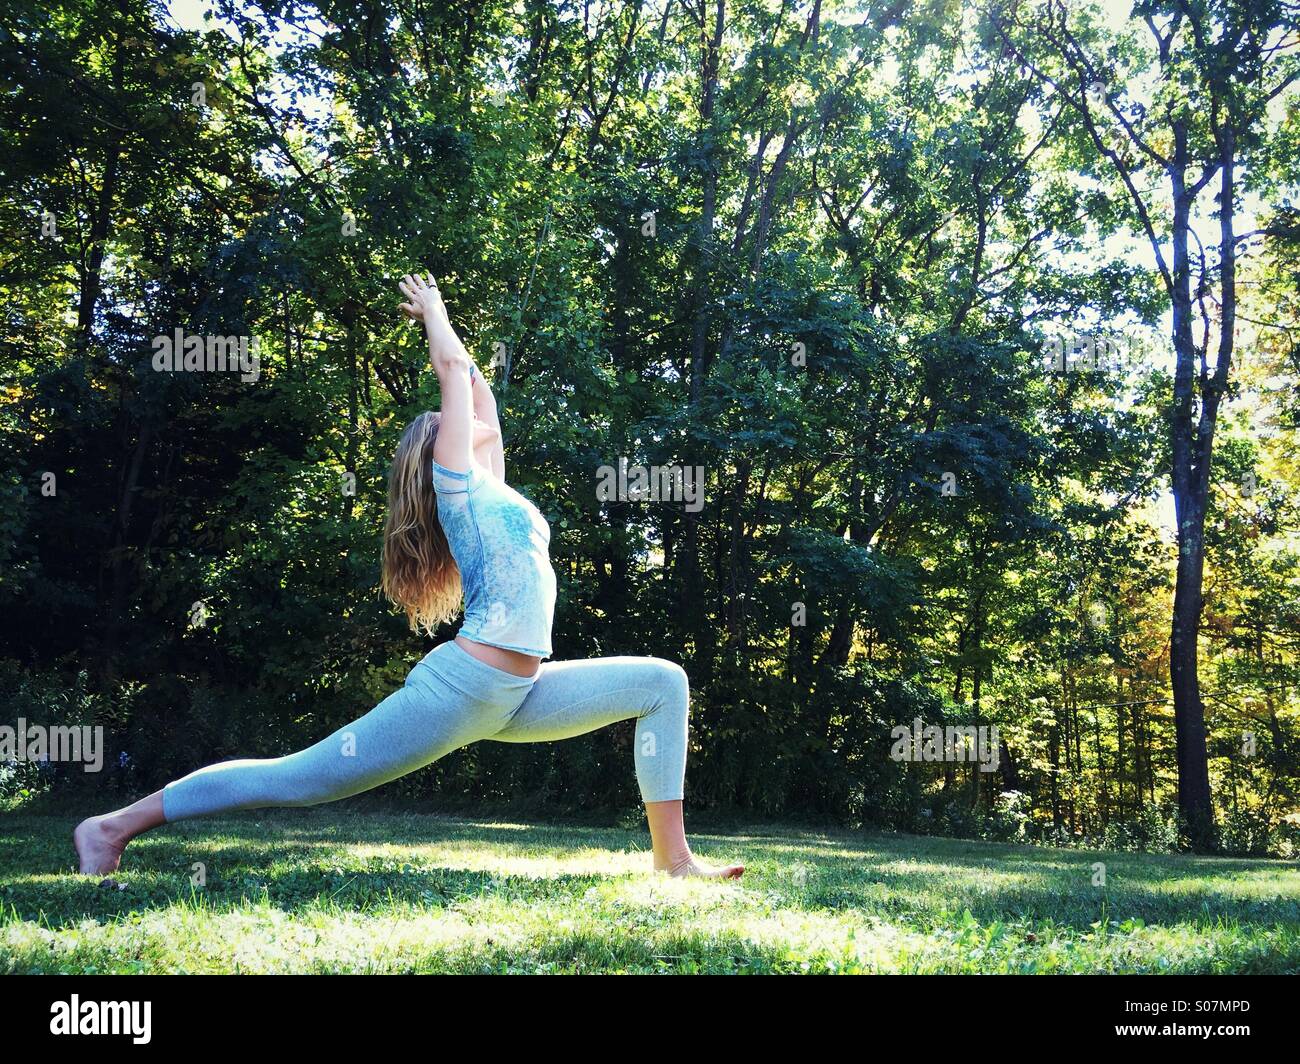 A woman doing yoga outside in the grass surrounded by nature. Stock Photo